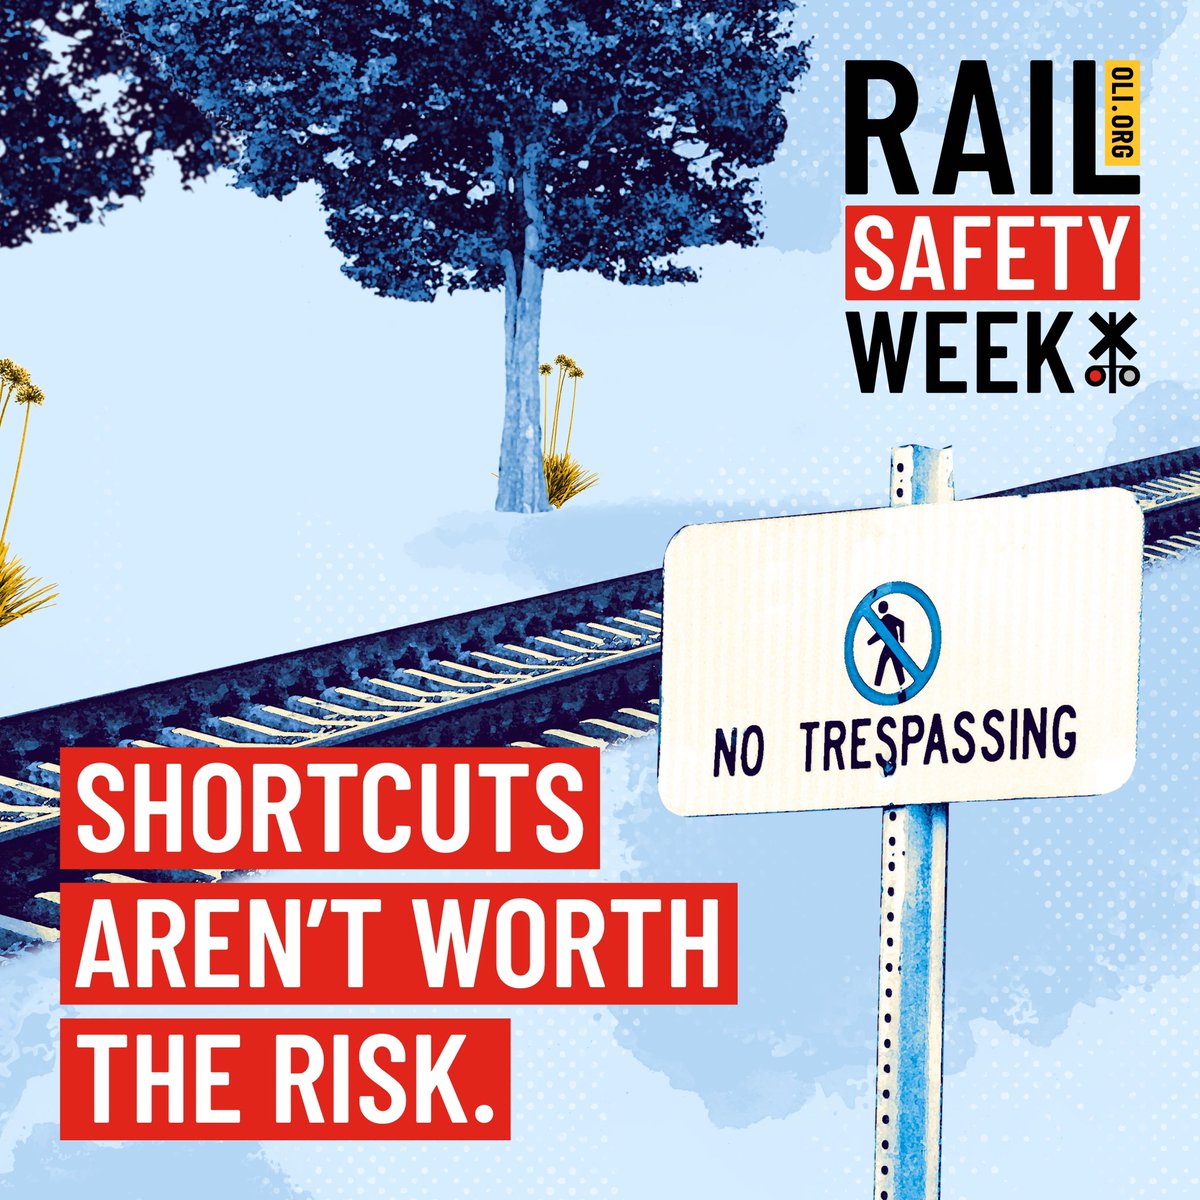 Every 3 hours in the United States a person or vehicle is hit by a train. 

Help #STOPTrackTragedies during #RailSafetyWeek

@SCOpLifesaver